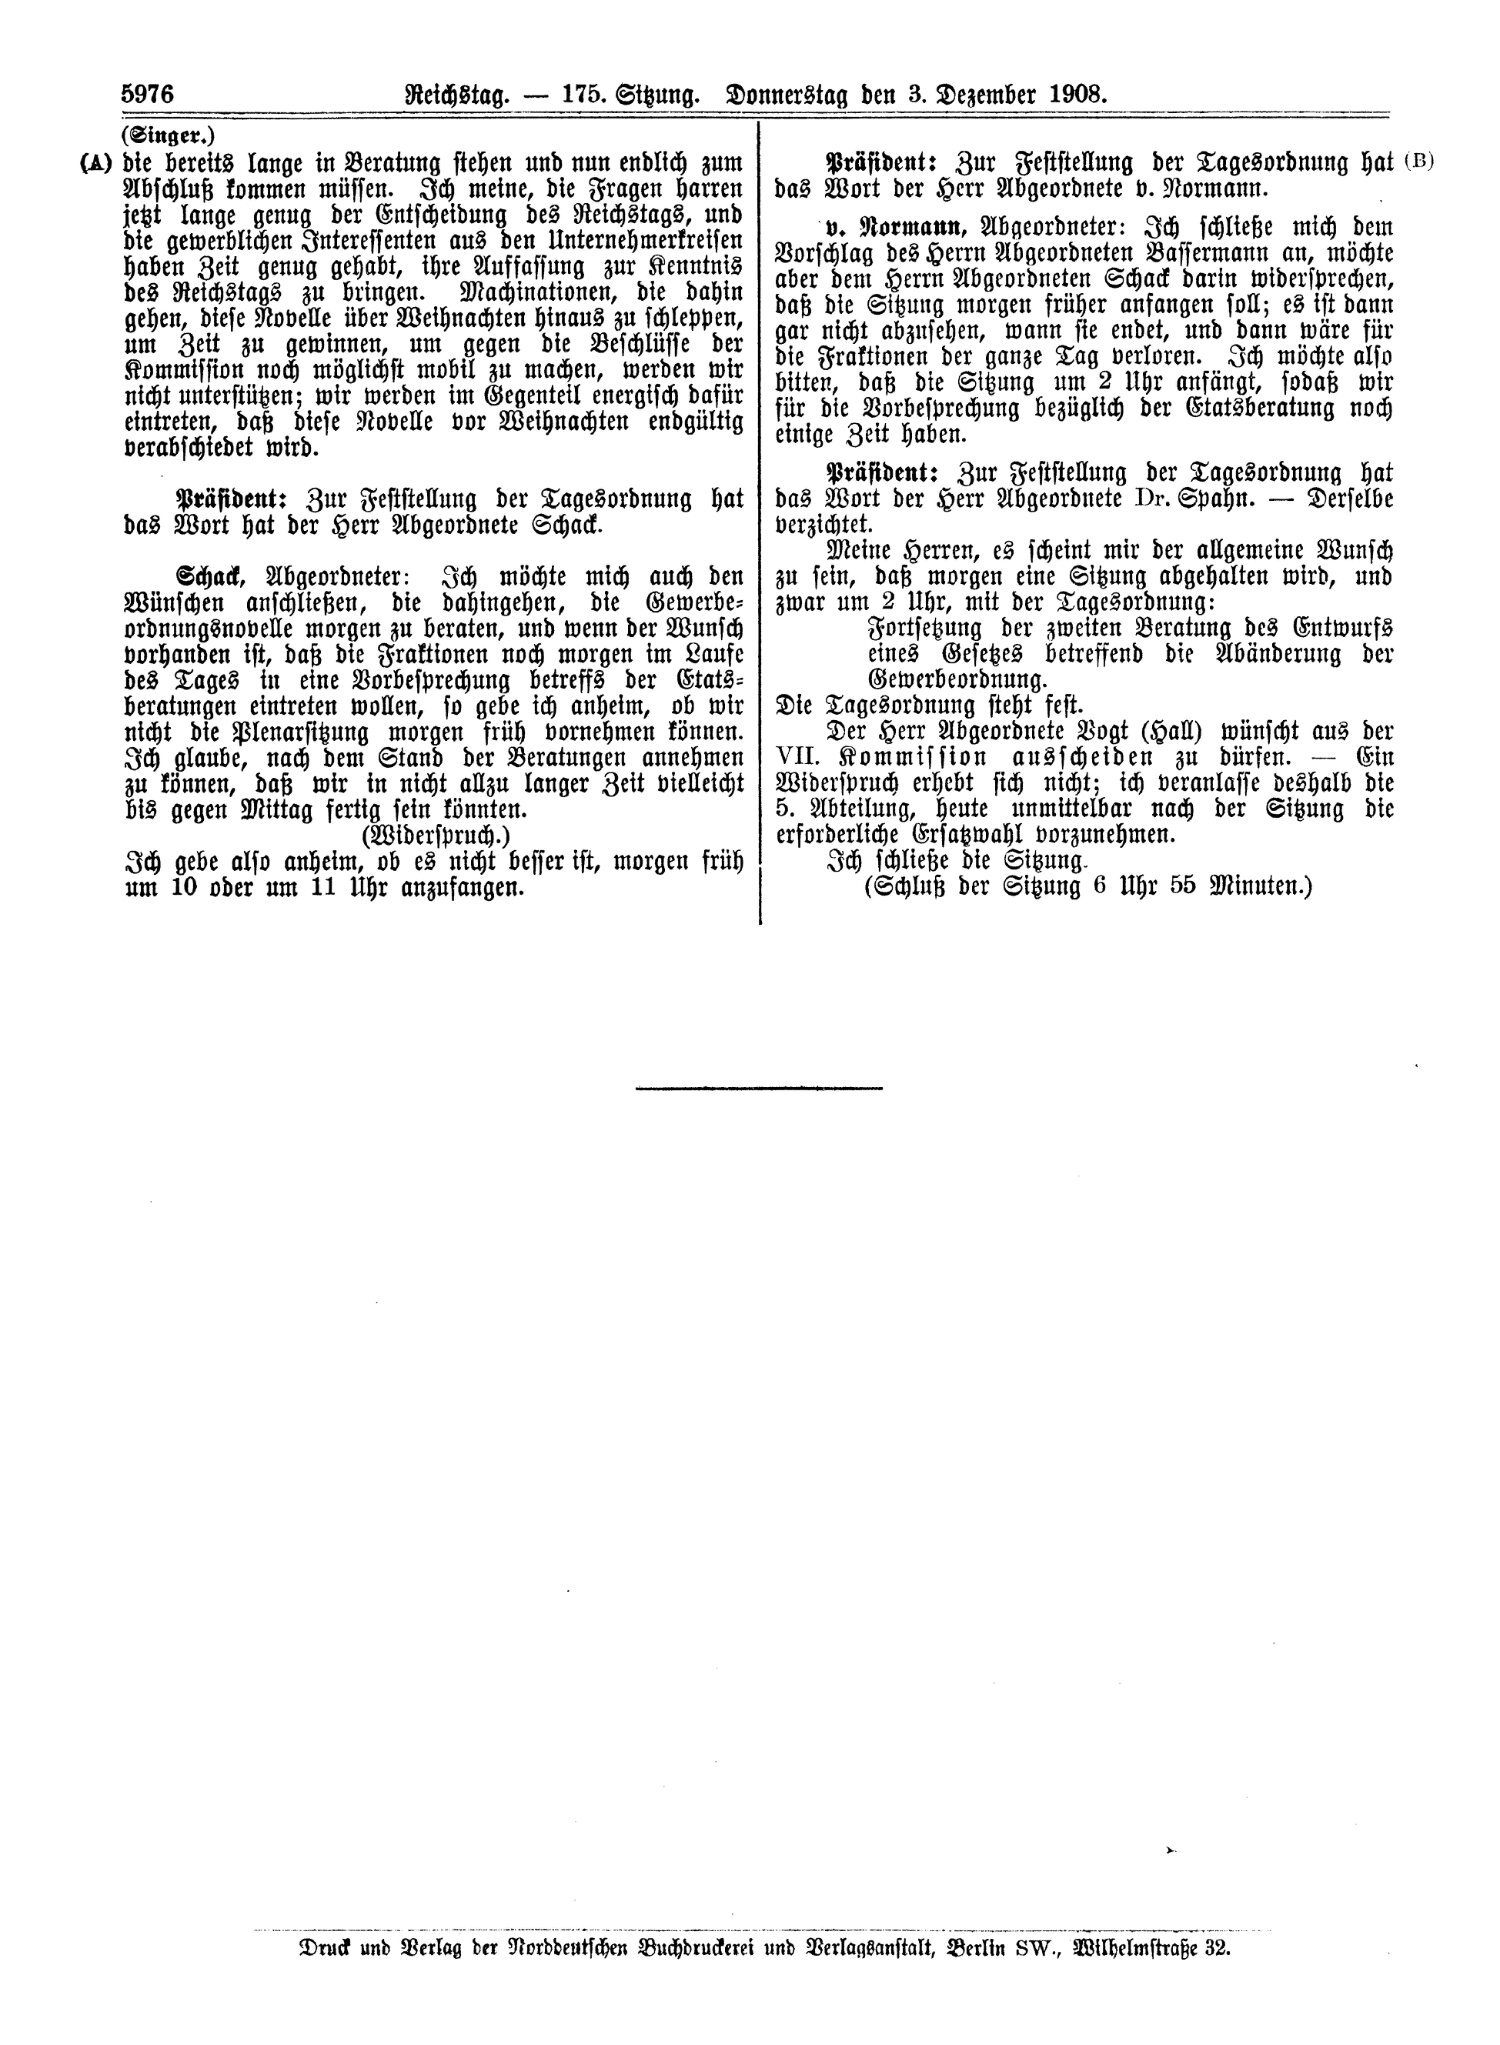 Scan of page 5976